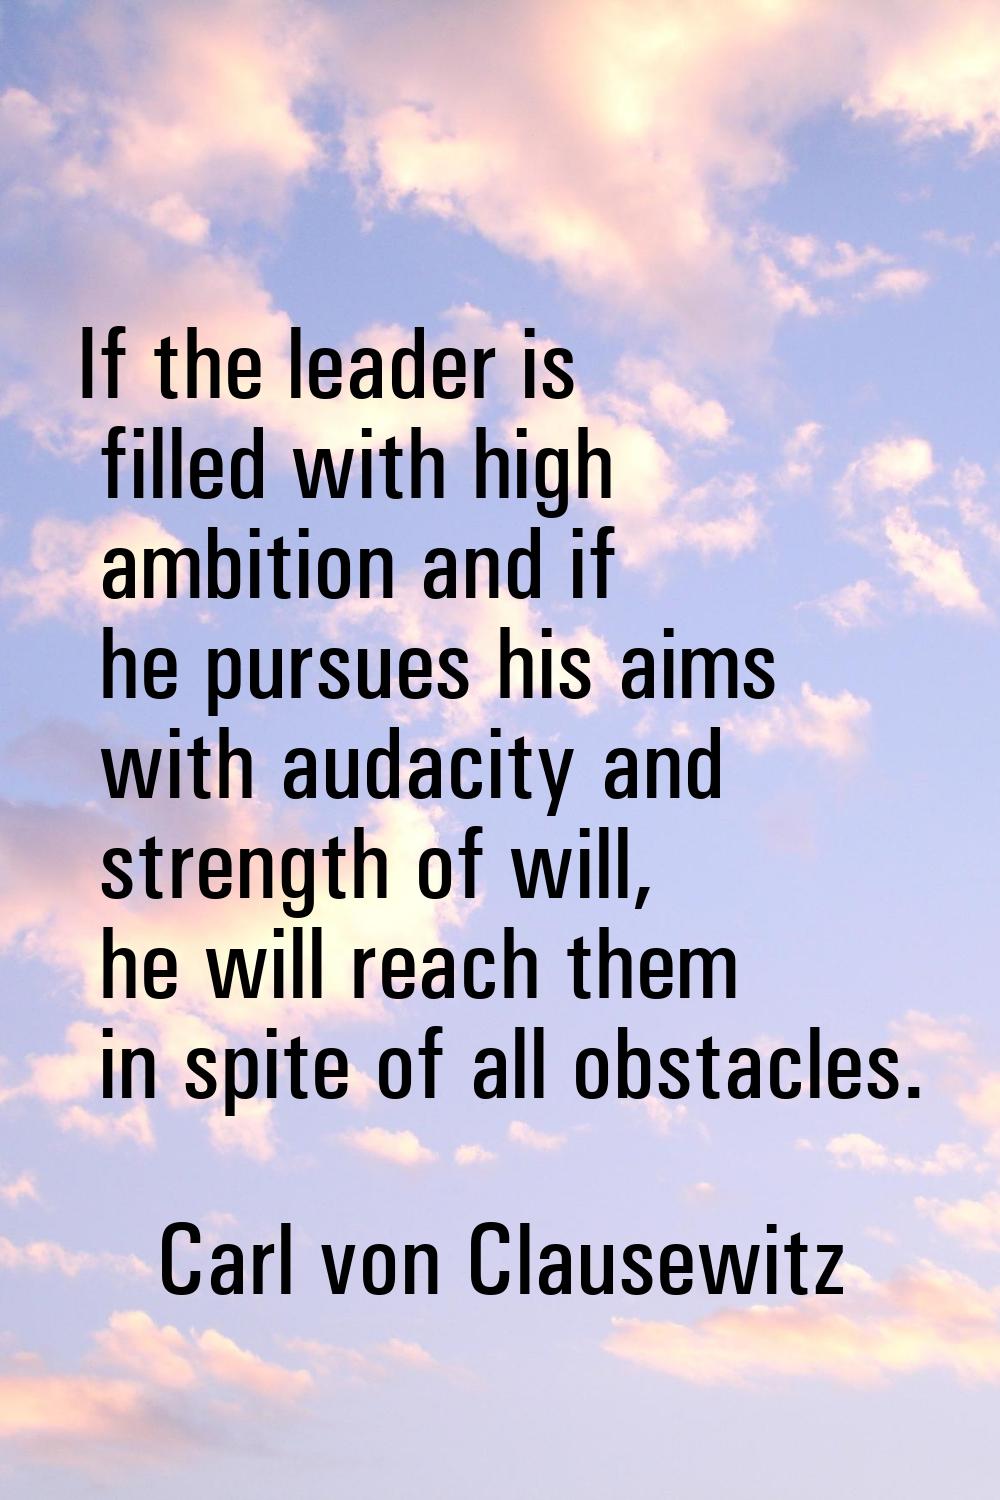 If the leader is filled with high ambition and if he pursues his aims with audacity and strength of